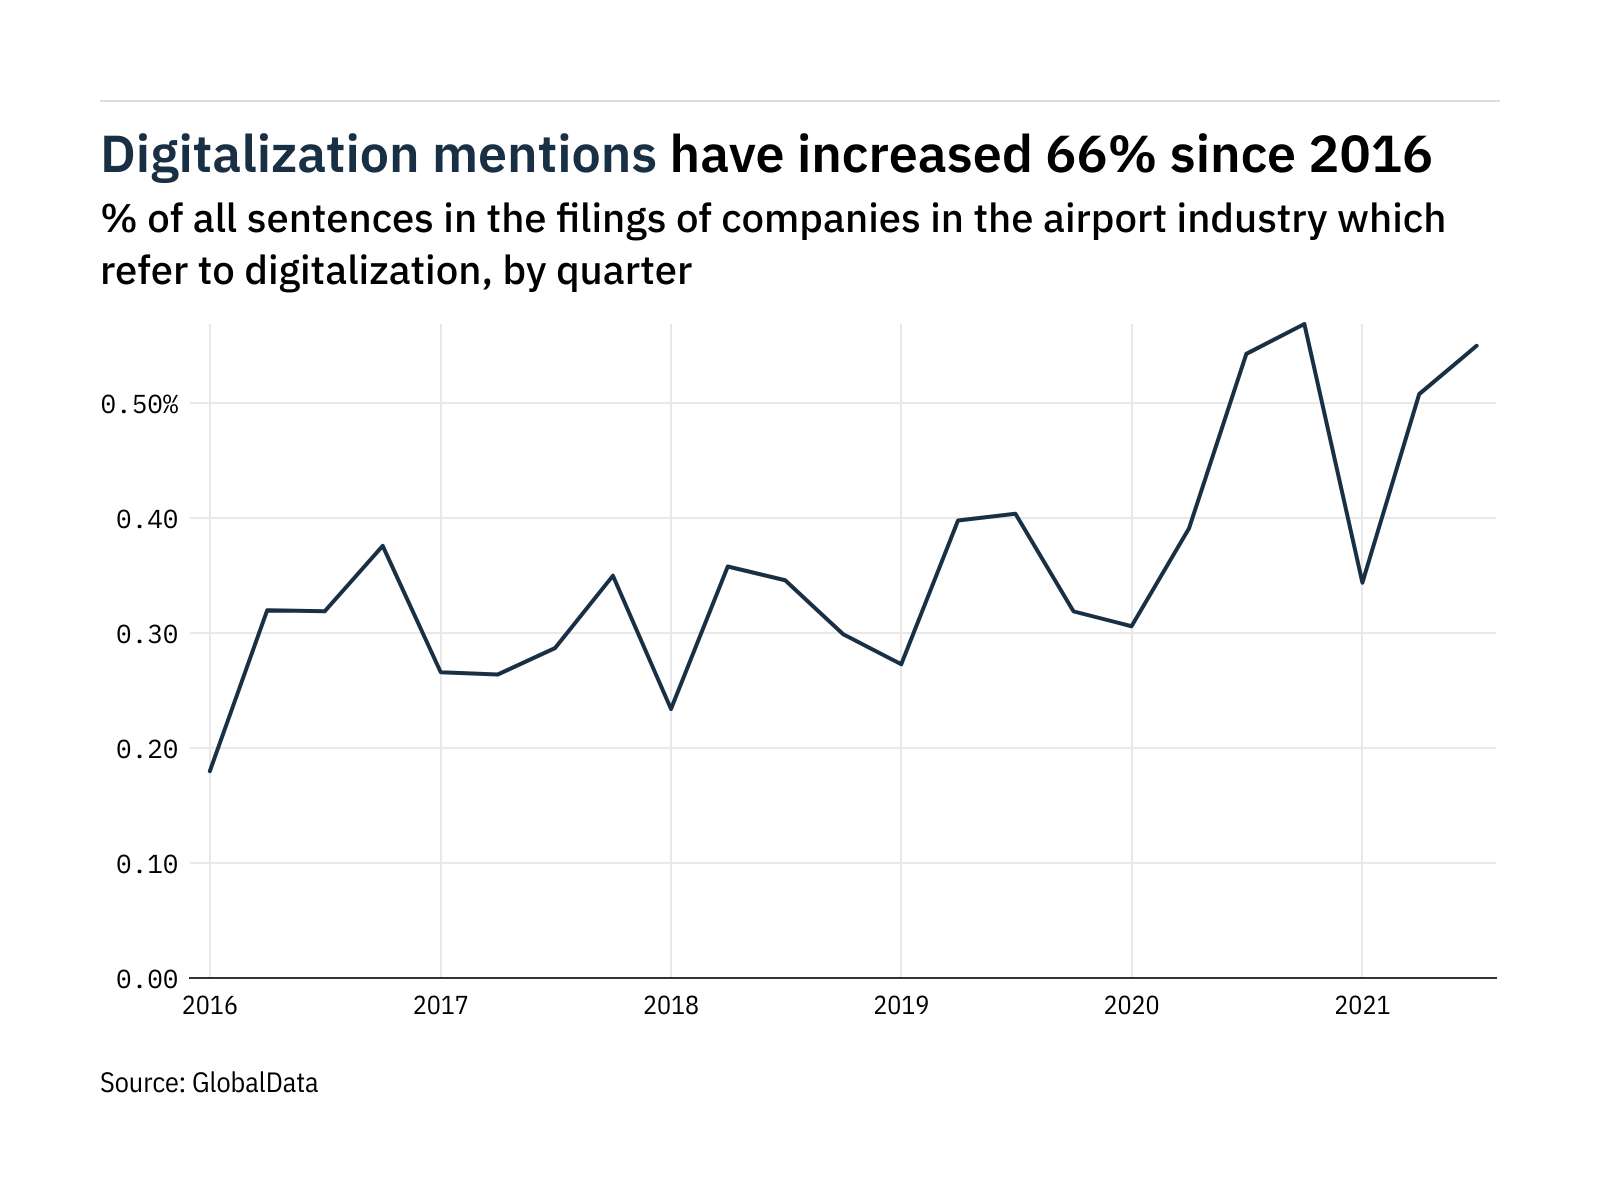 Filings buzz: tracking digitalization mentions in the airport industry